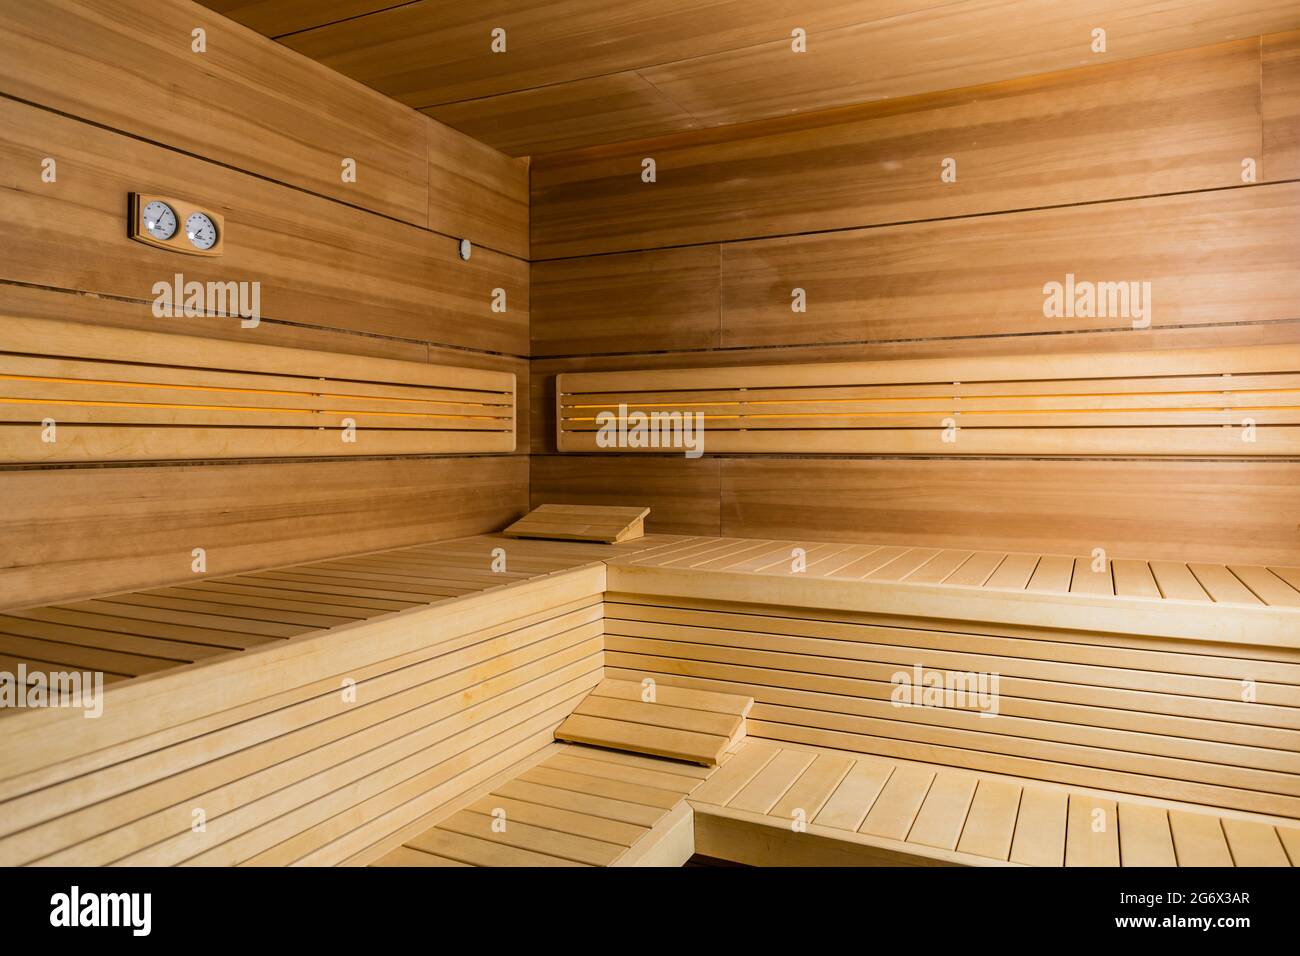 Interior of an empty dry sauna with brown wooden walls and benches in a modern hotel or in a spa and wellness center Stock Photo